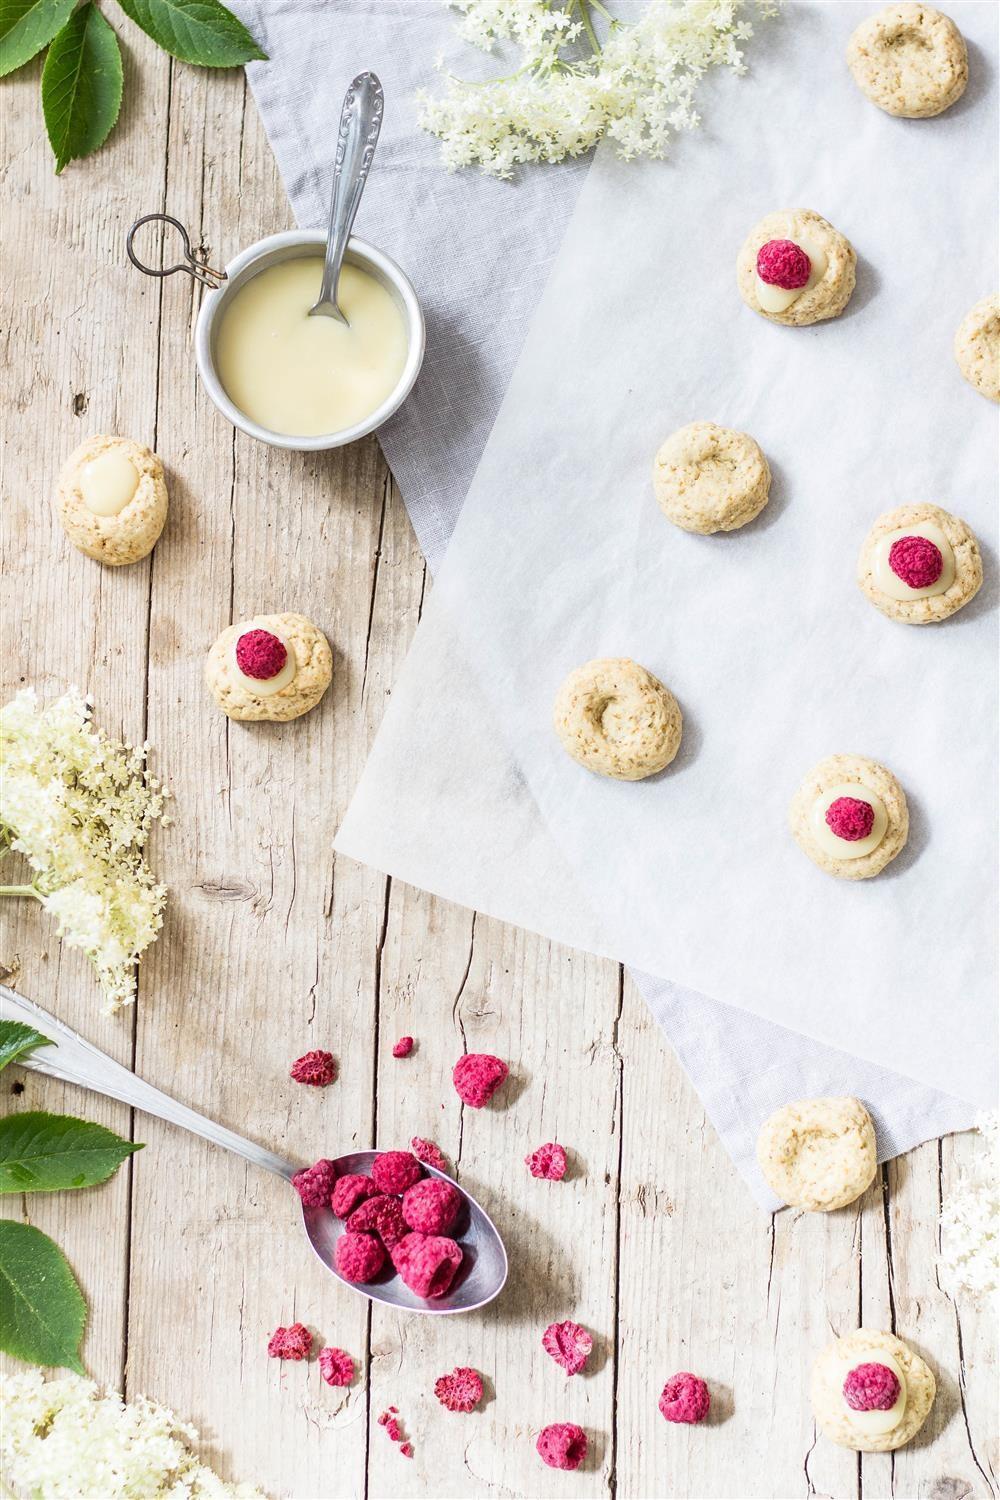 These cute elderflower cookie bites are what elderflower season is all about. Flowers and girliness!